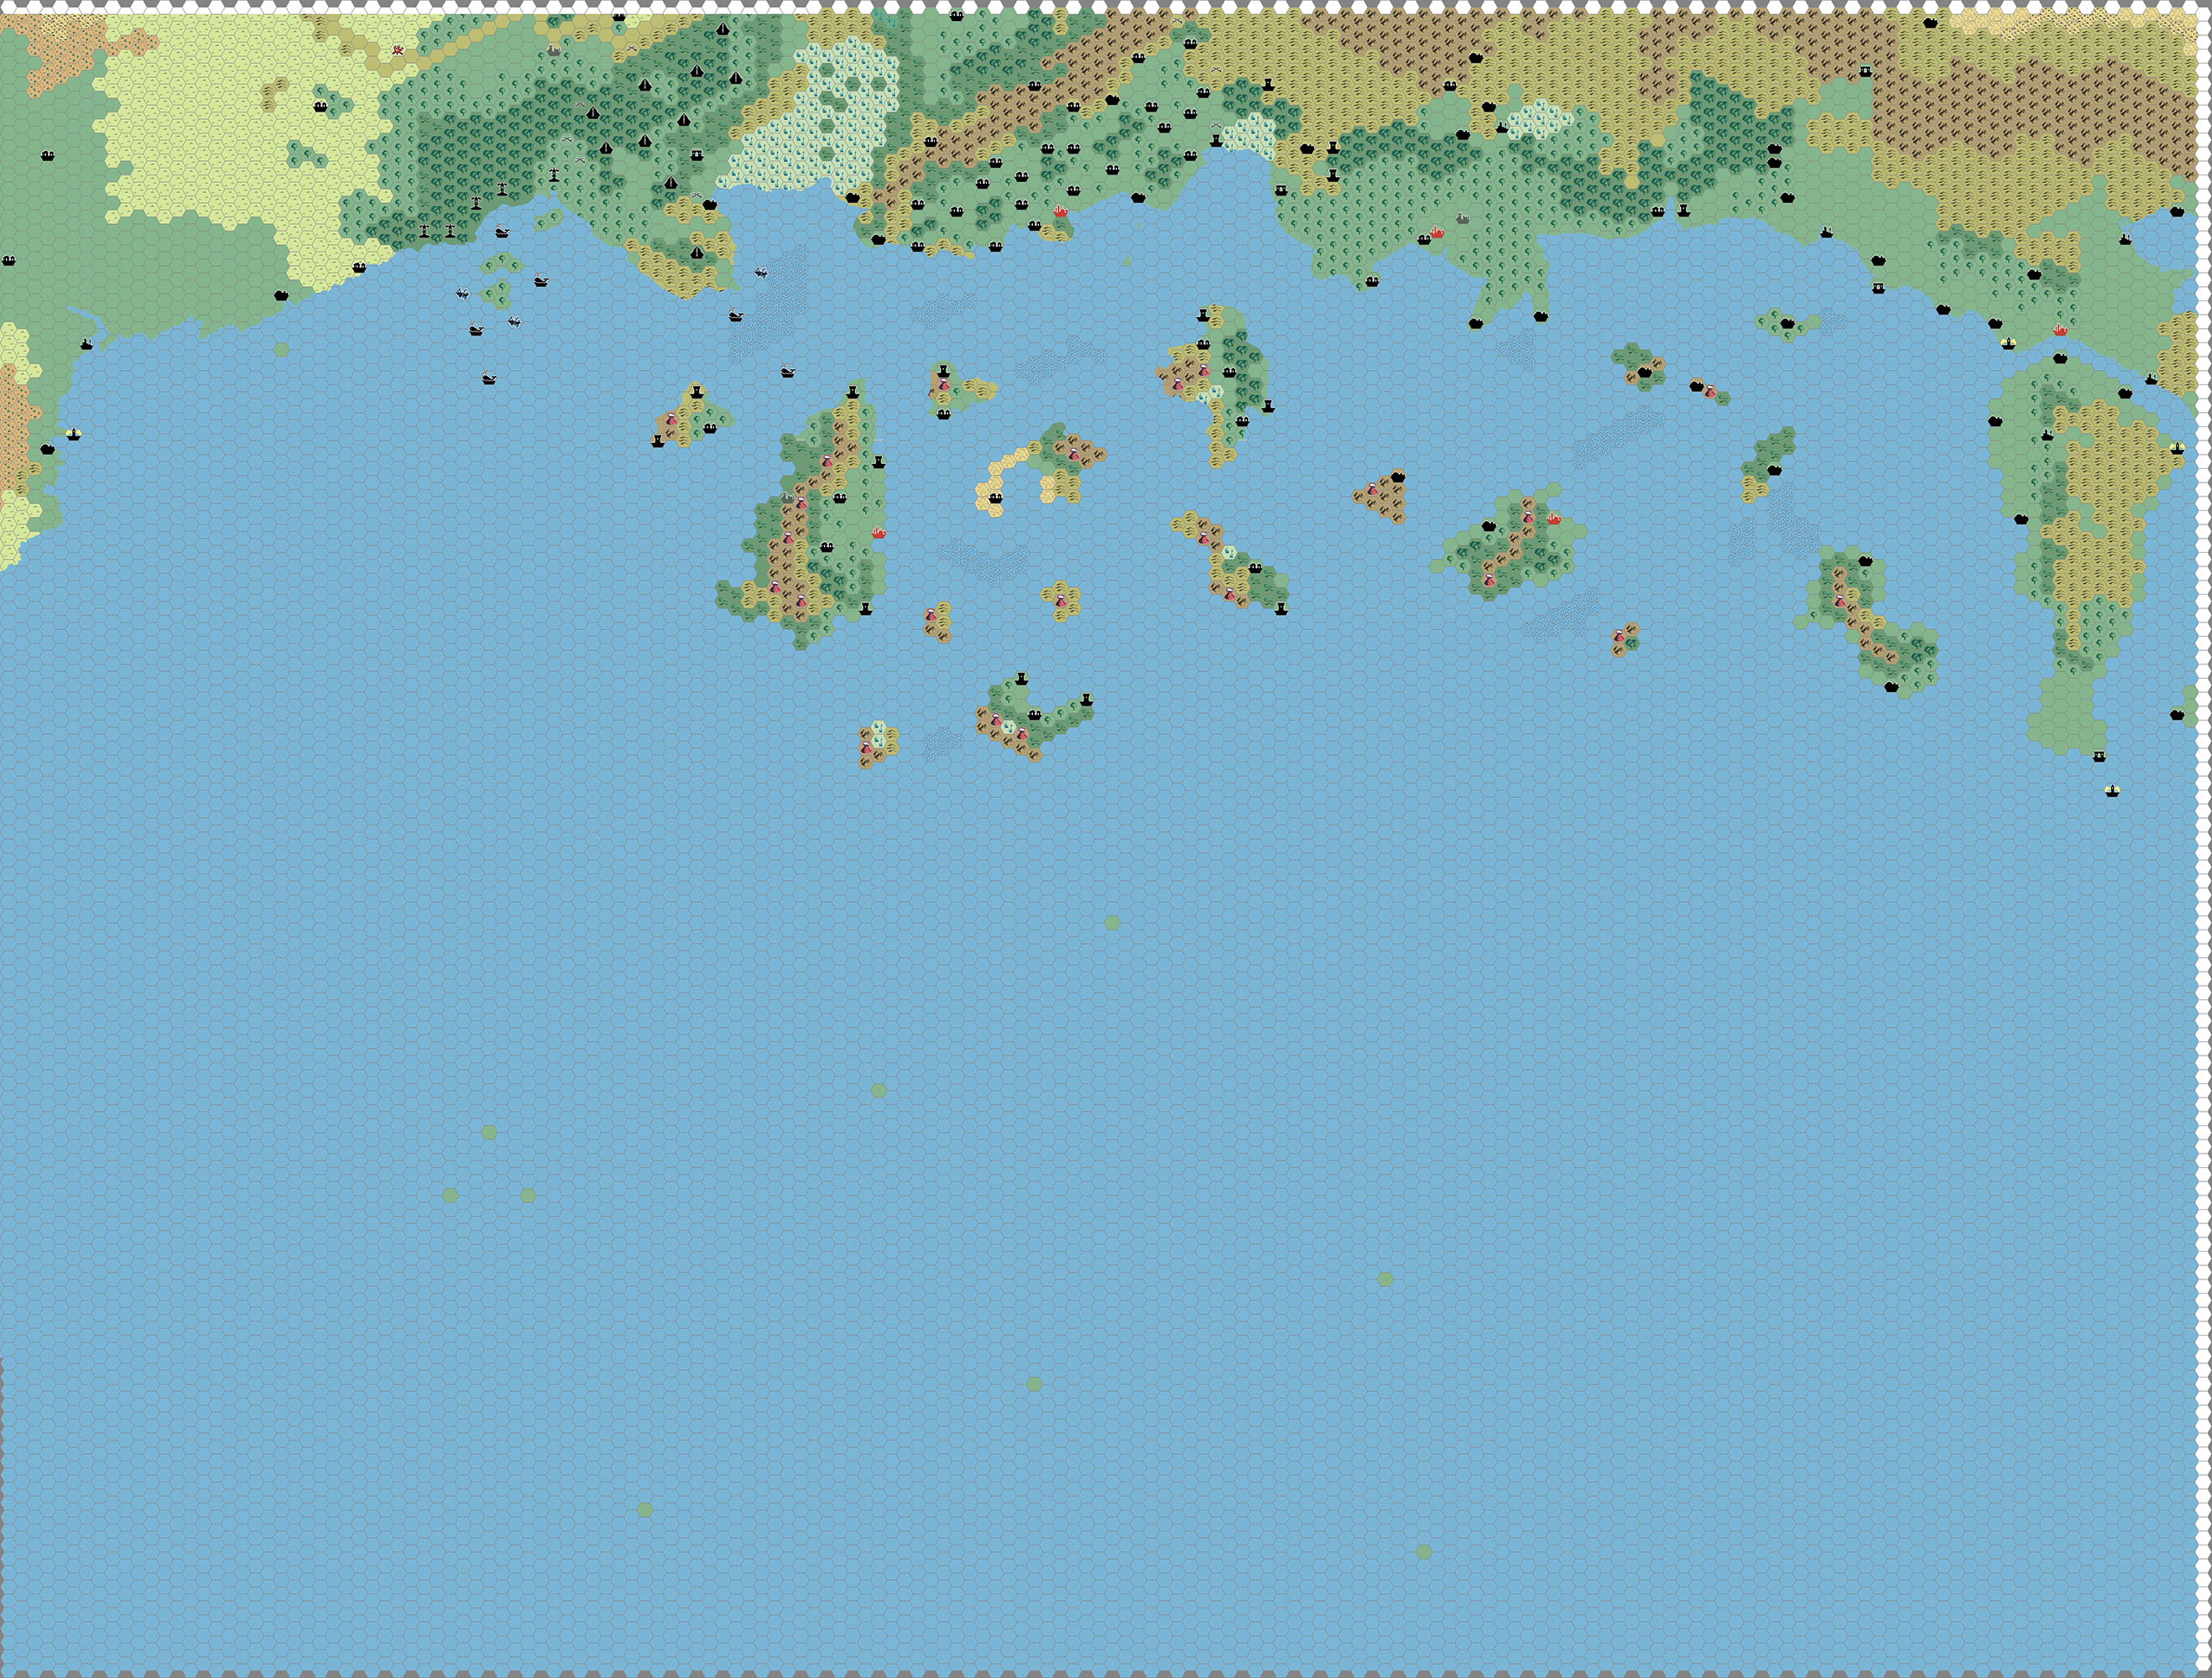 Work-in-progress map of the Southern Known World, 8 miles per hex by Thibault Sarlat, July 2005